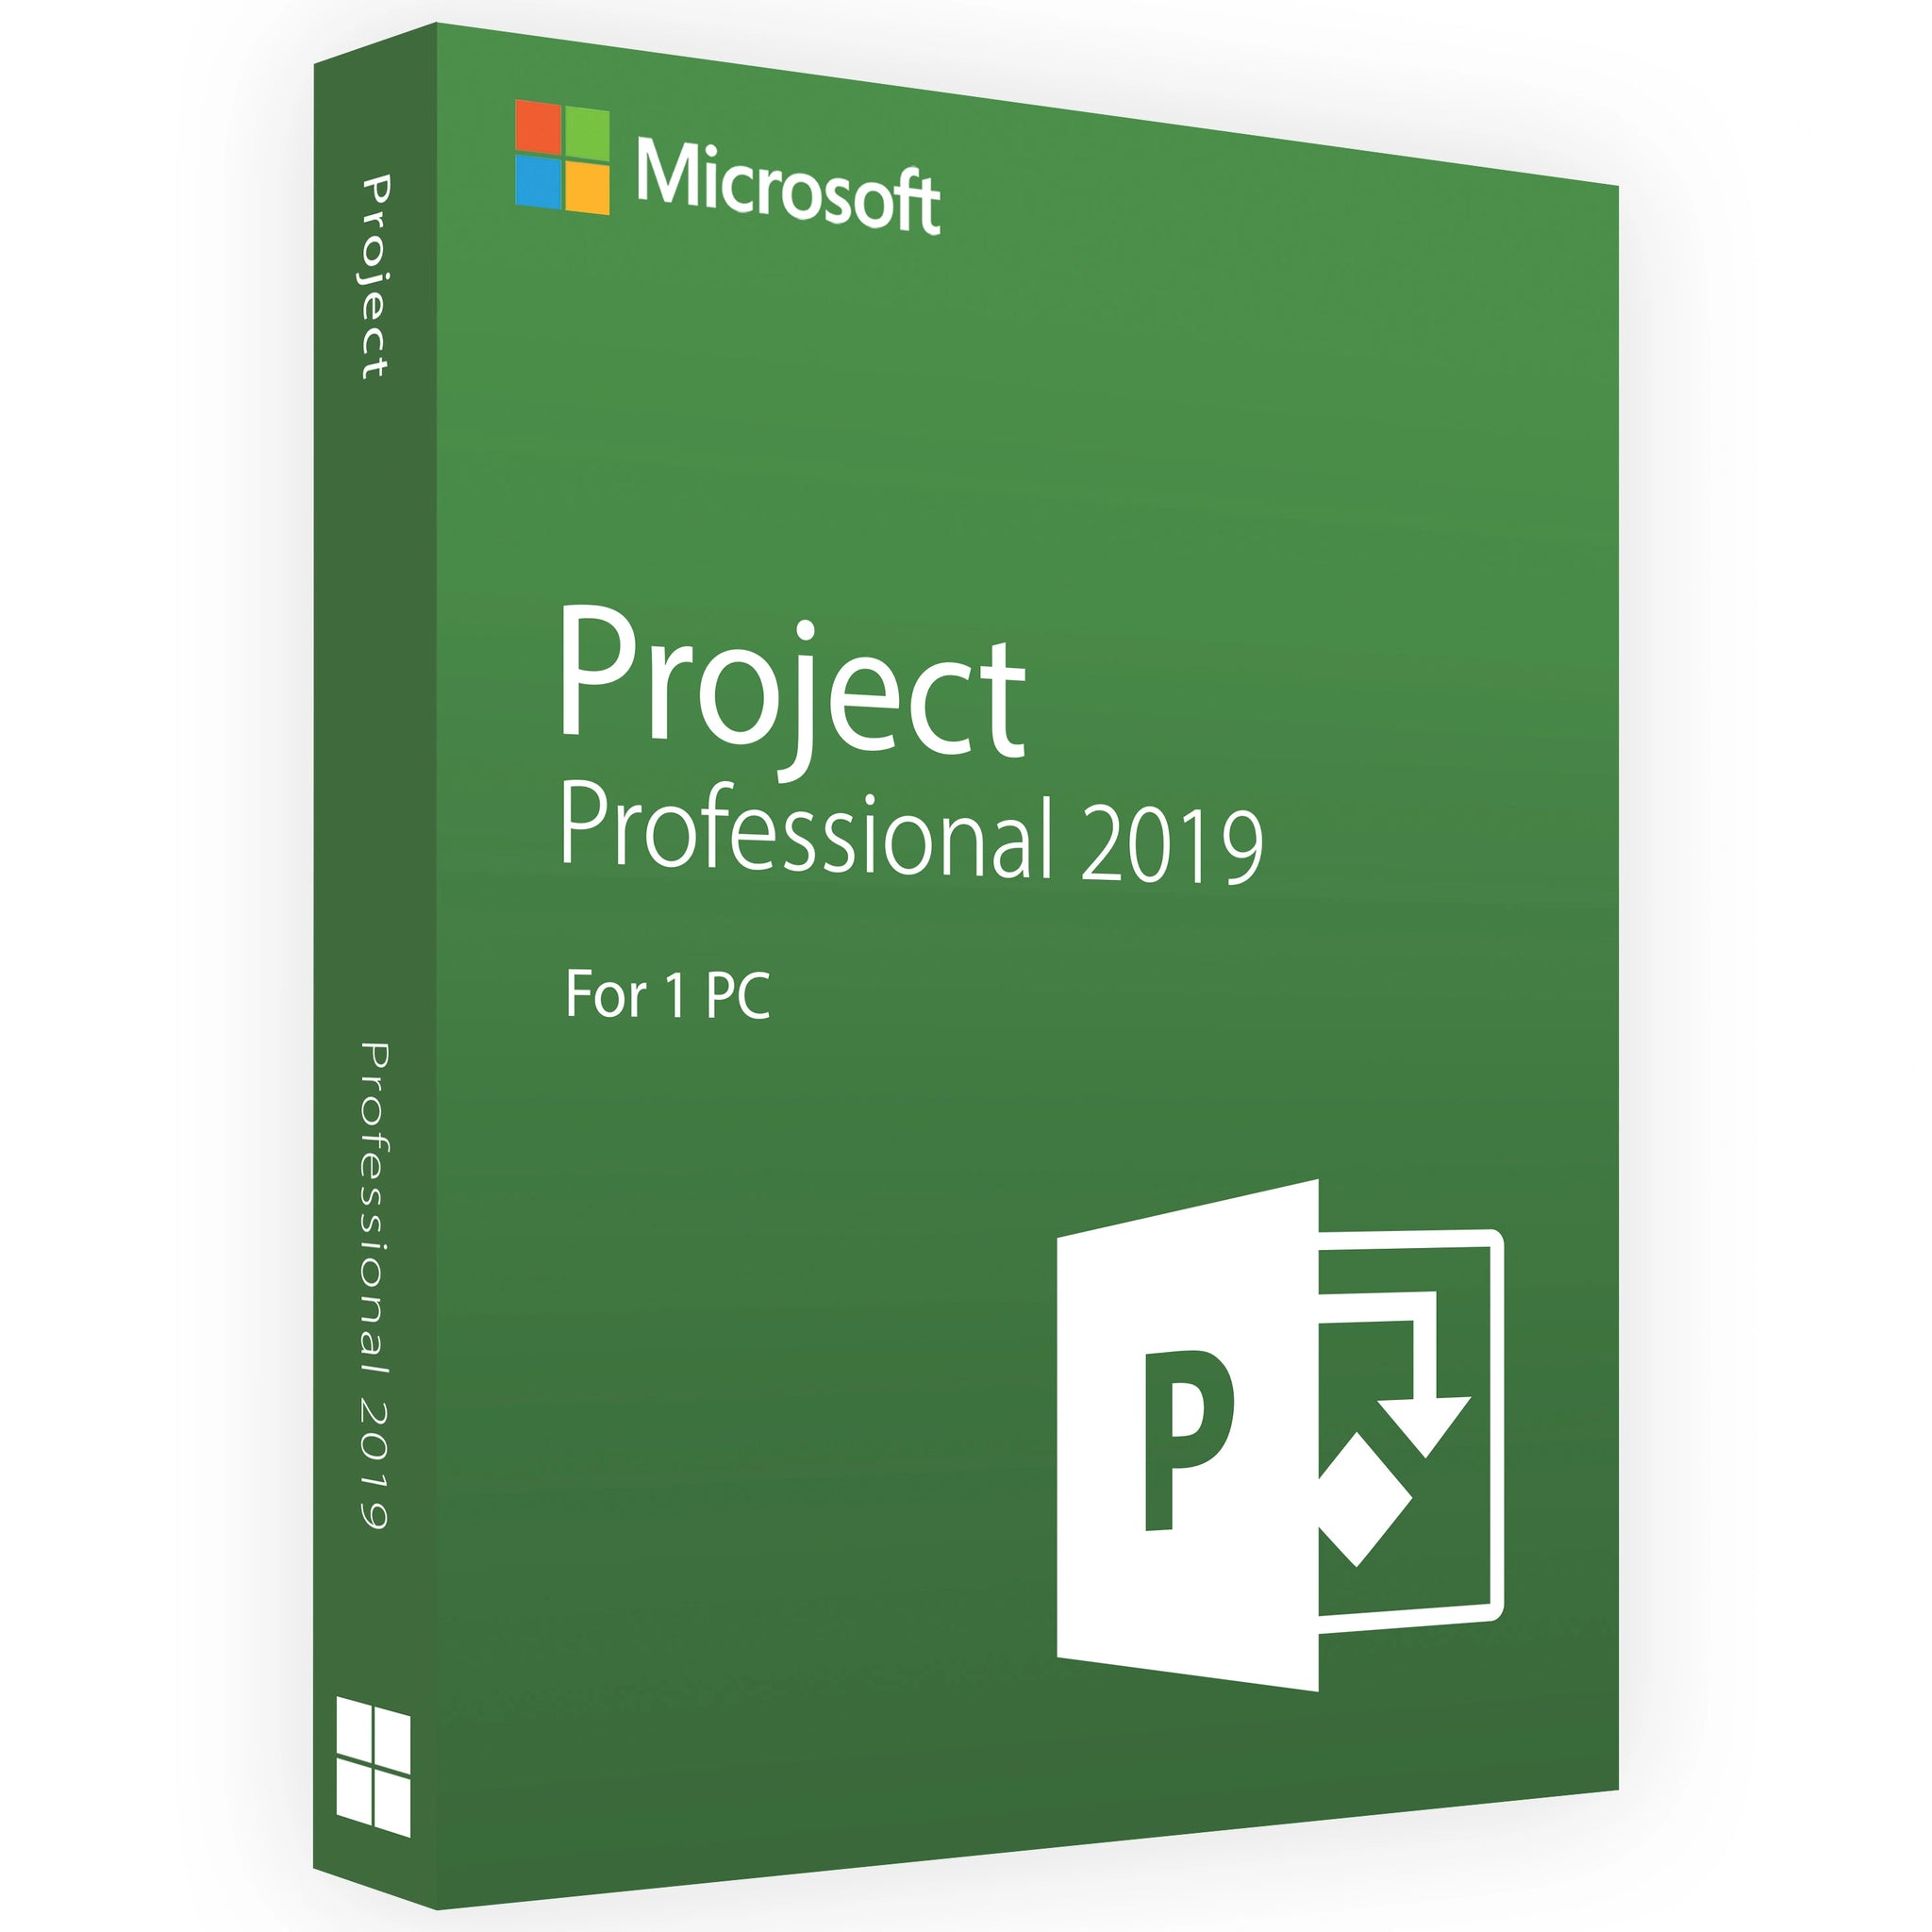 Microsoft Project 2019 Professional - Lifetime License Key for 1 PC